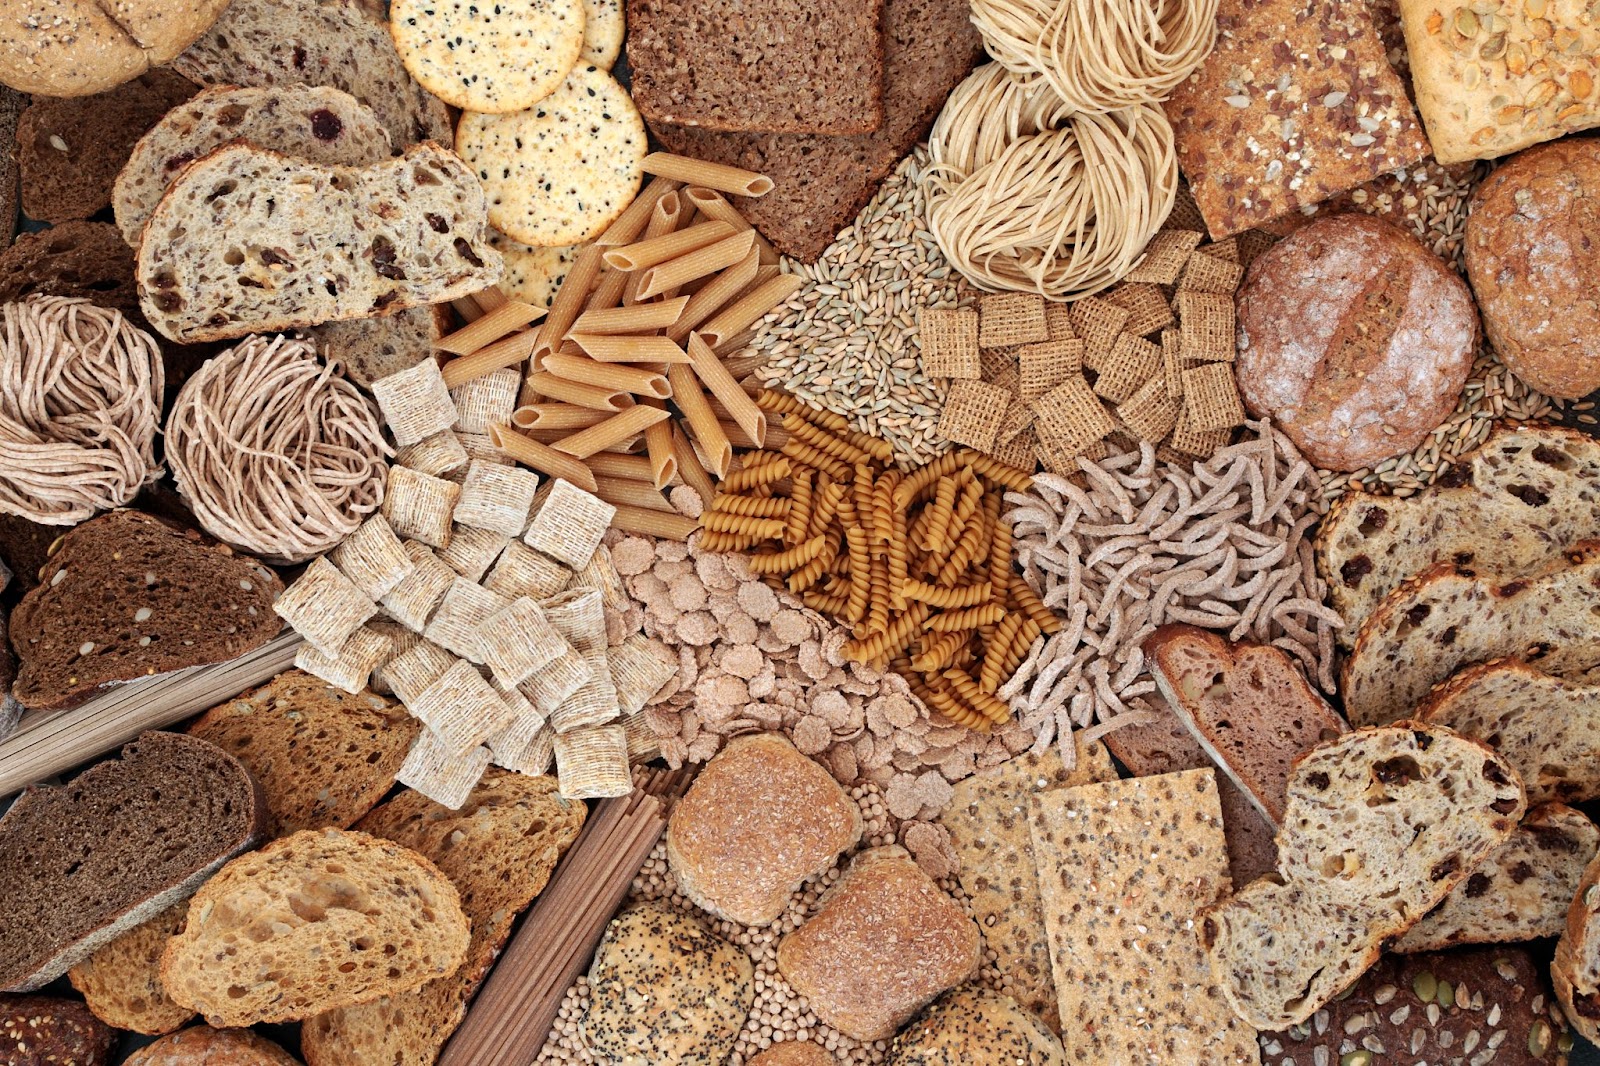 Image of several different kinds of high-fiber, low-fat, complex carbohydrates